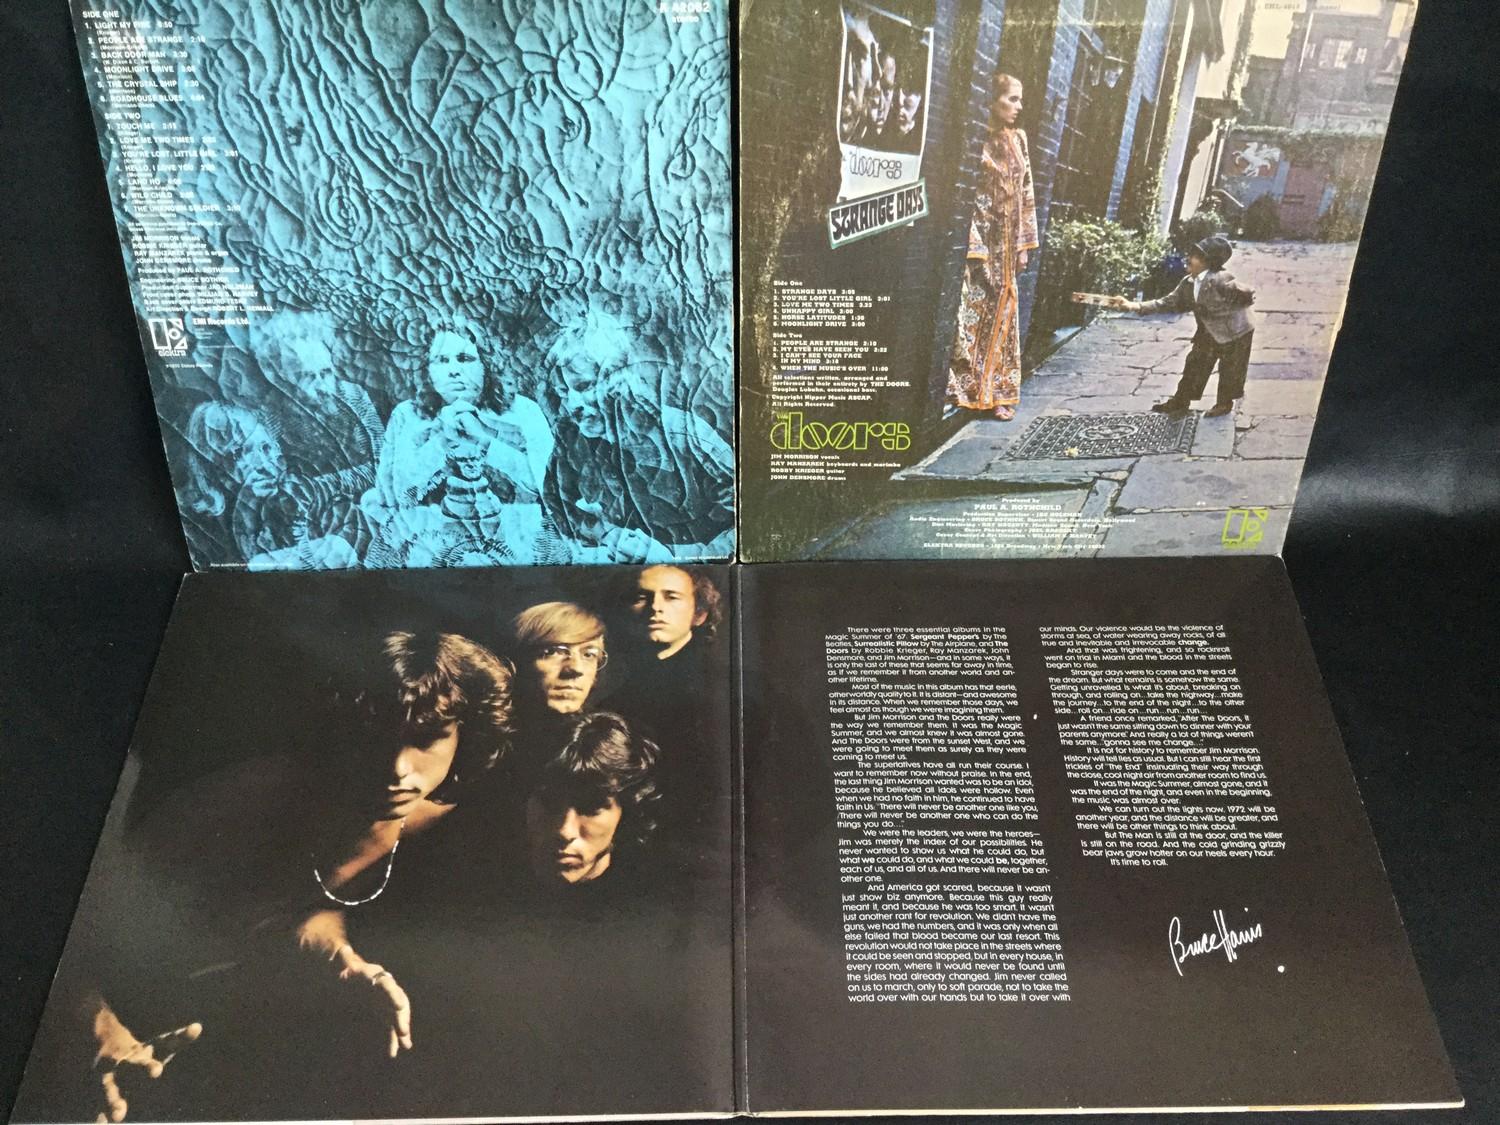 3 X DOORS VINYL LP RECORDS. Titles here include - 13 - Strange Days and the double album Weird